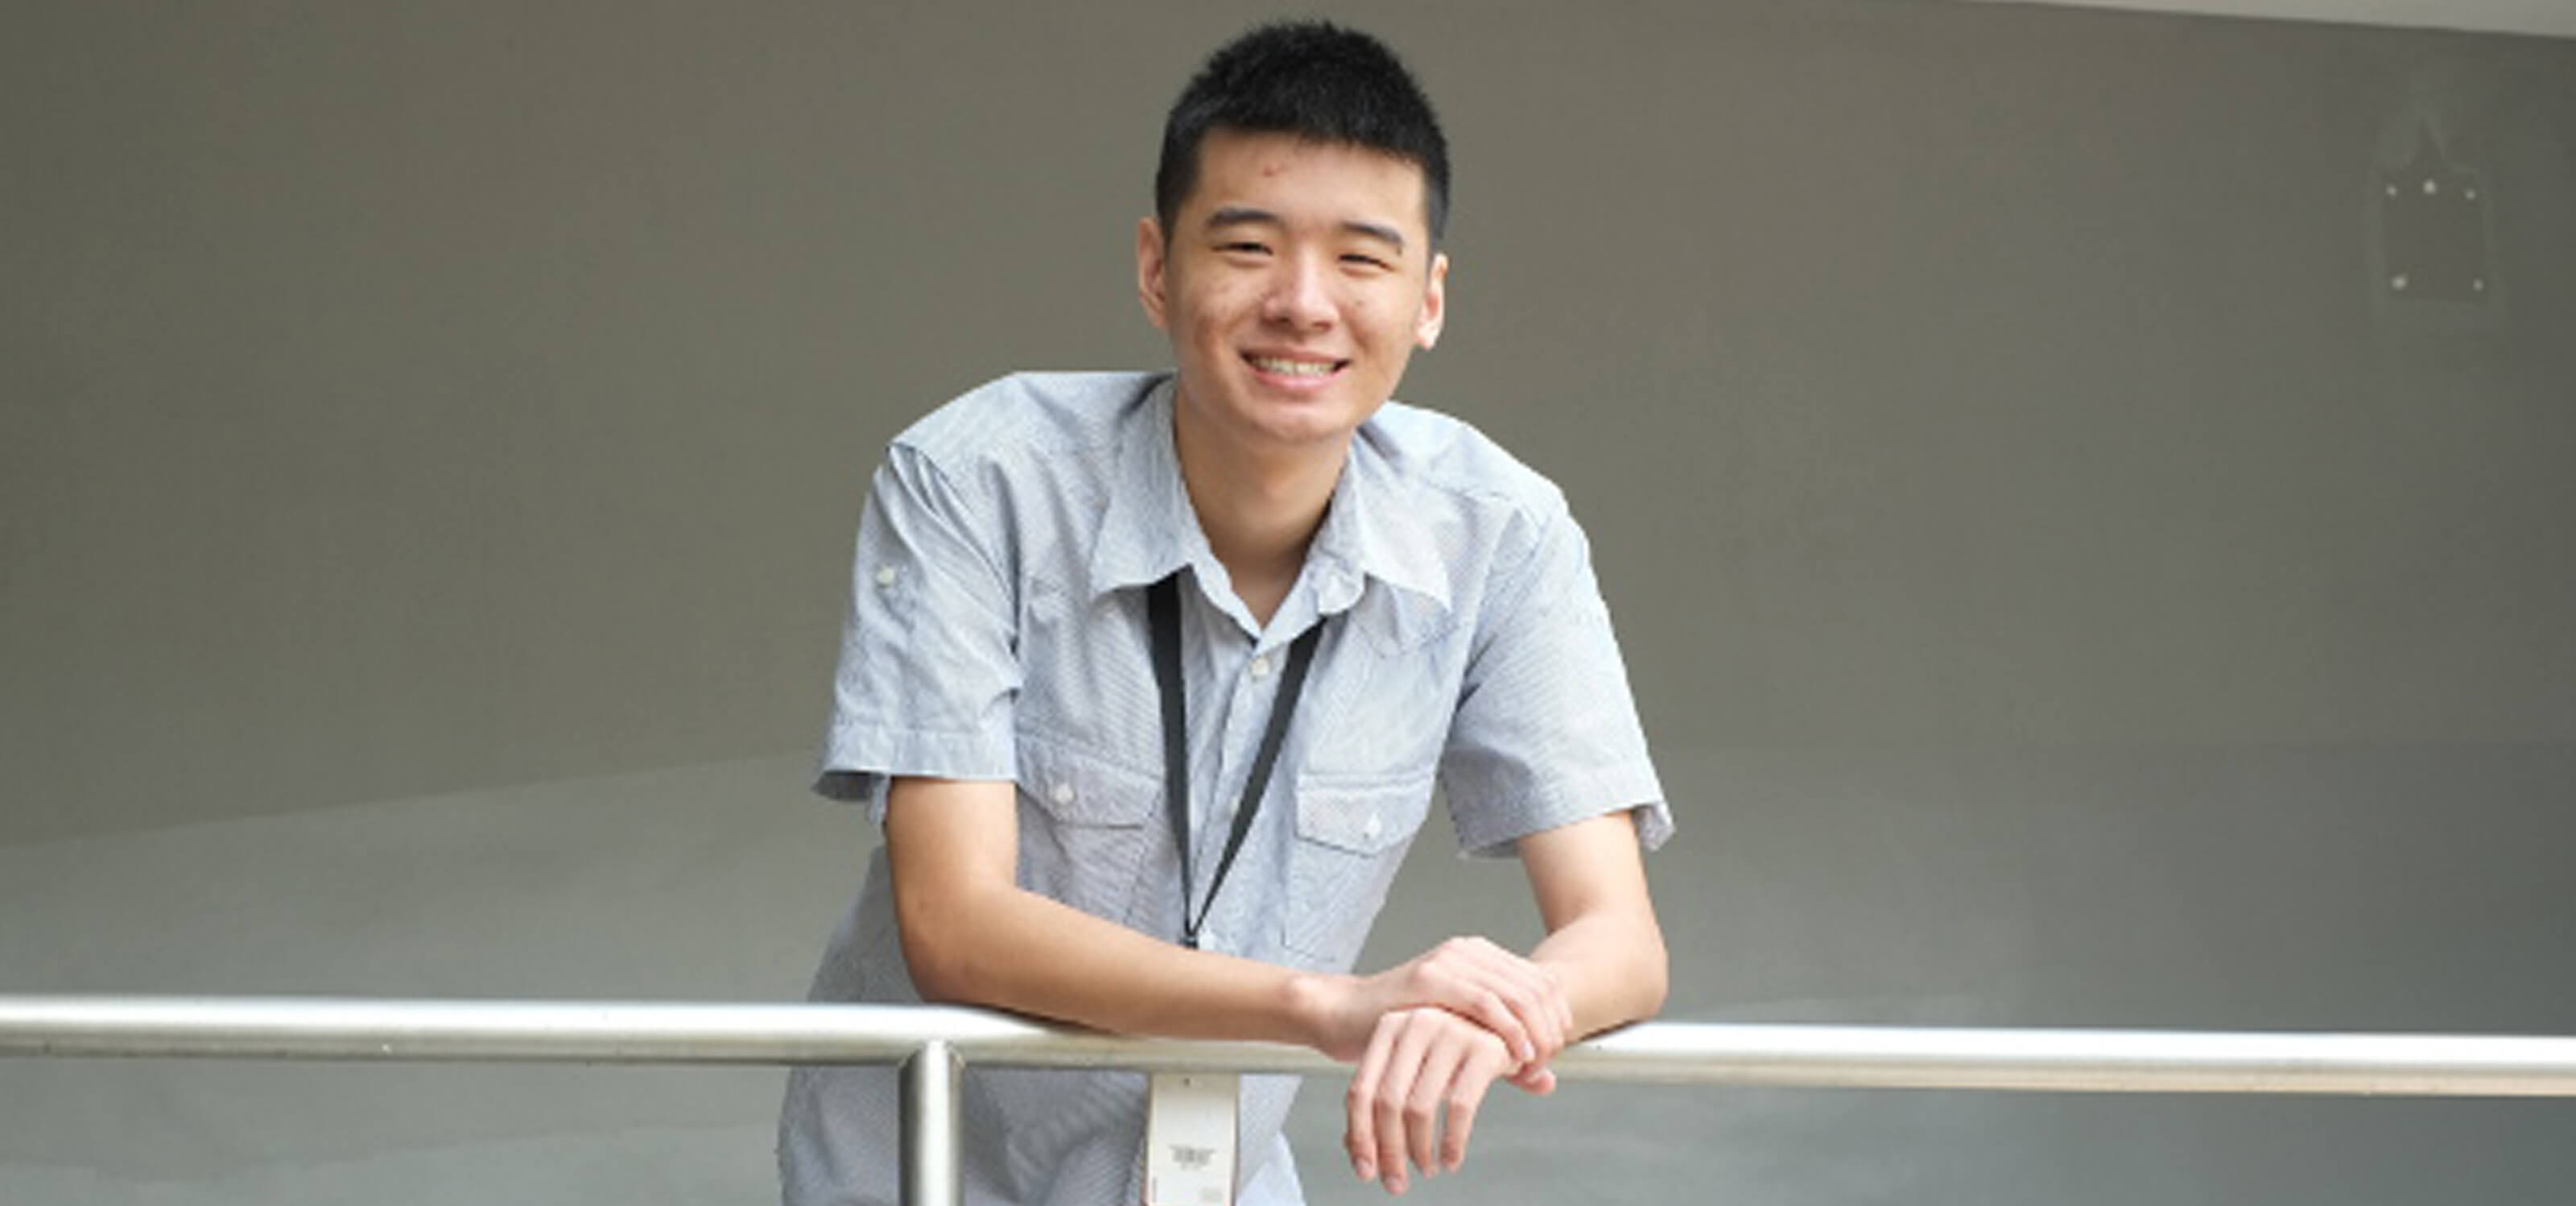 DigiPen (Singapore) student Tan Yao Wei leans on a metal railing posing for a photo